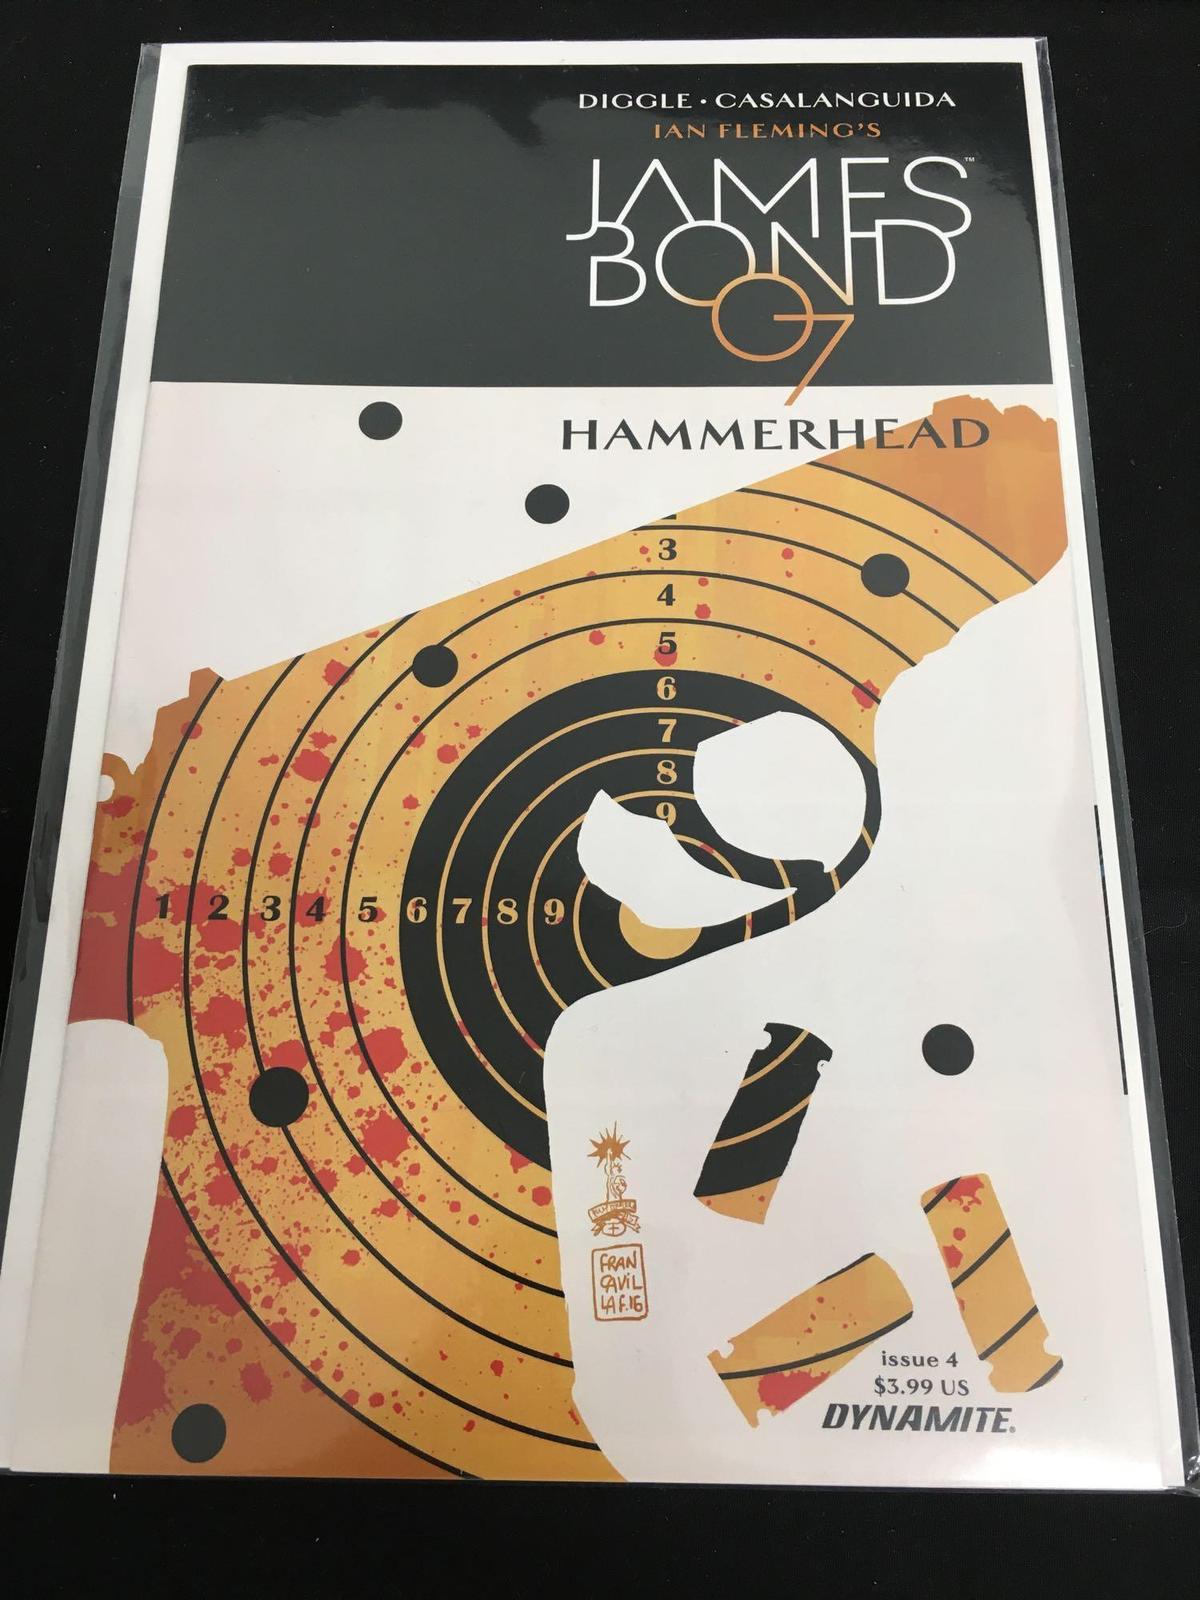 James Bond 007 Hammerhead #4 Comic Book from Amazing Collection